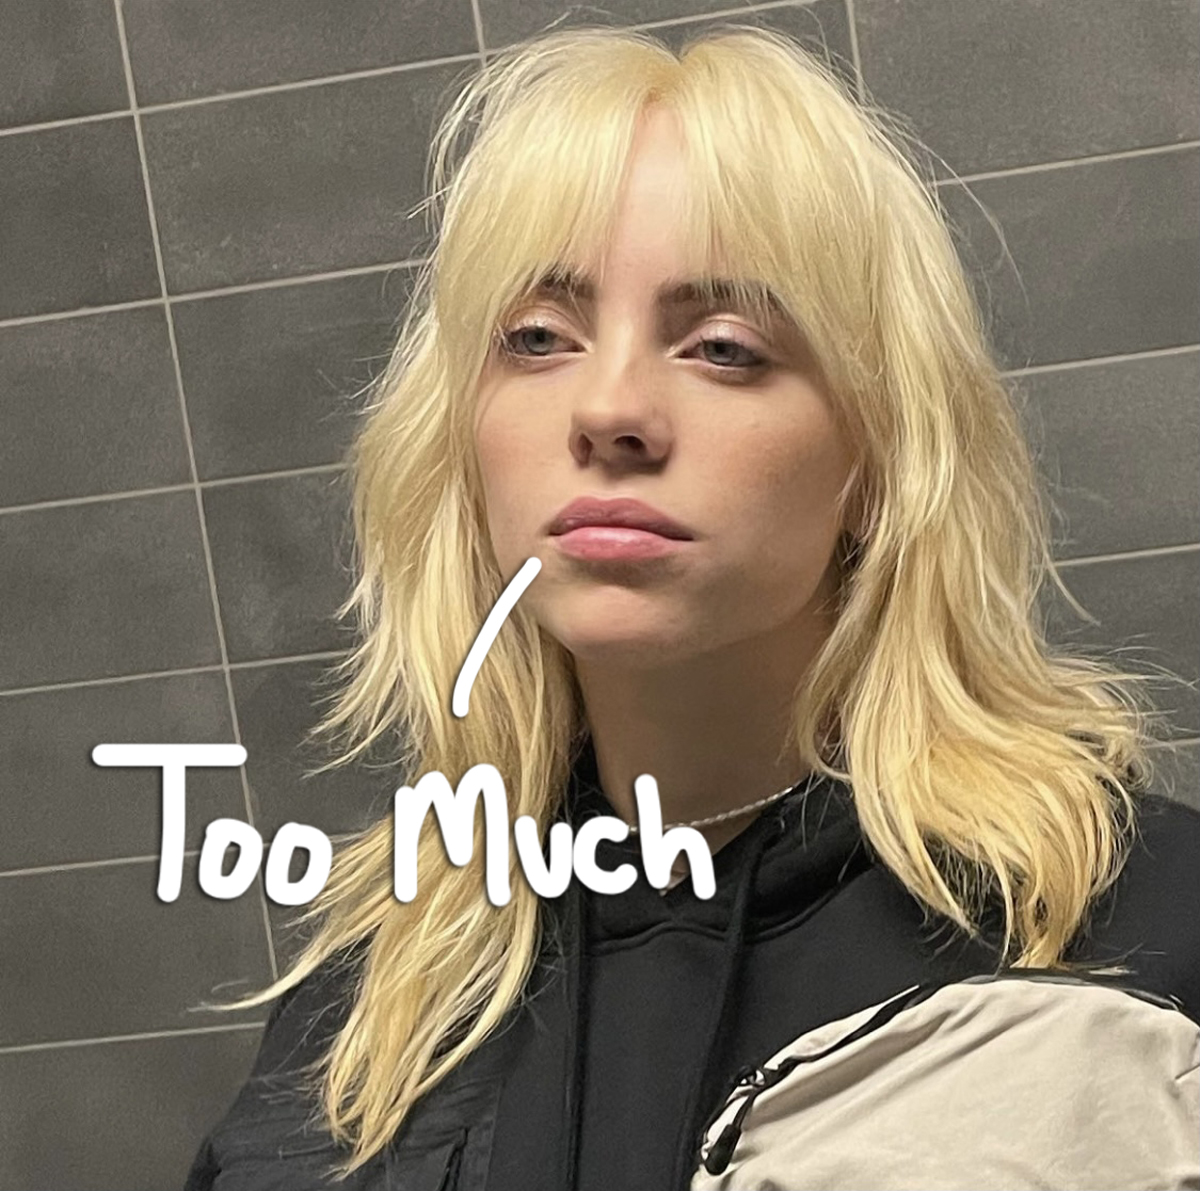 Billie Eilish Reveals Insane Reaction To Her Vogue Cover Made Her Never Want To Post Again